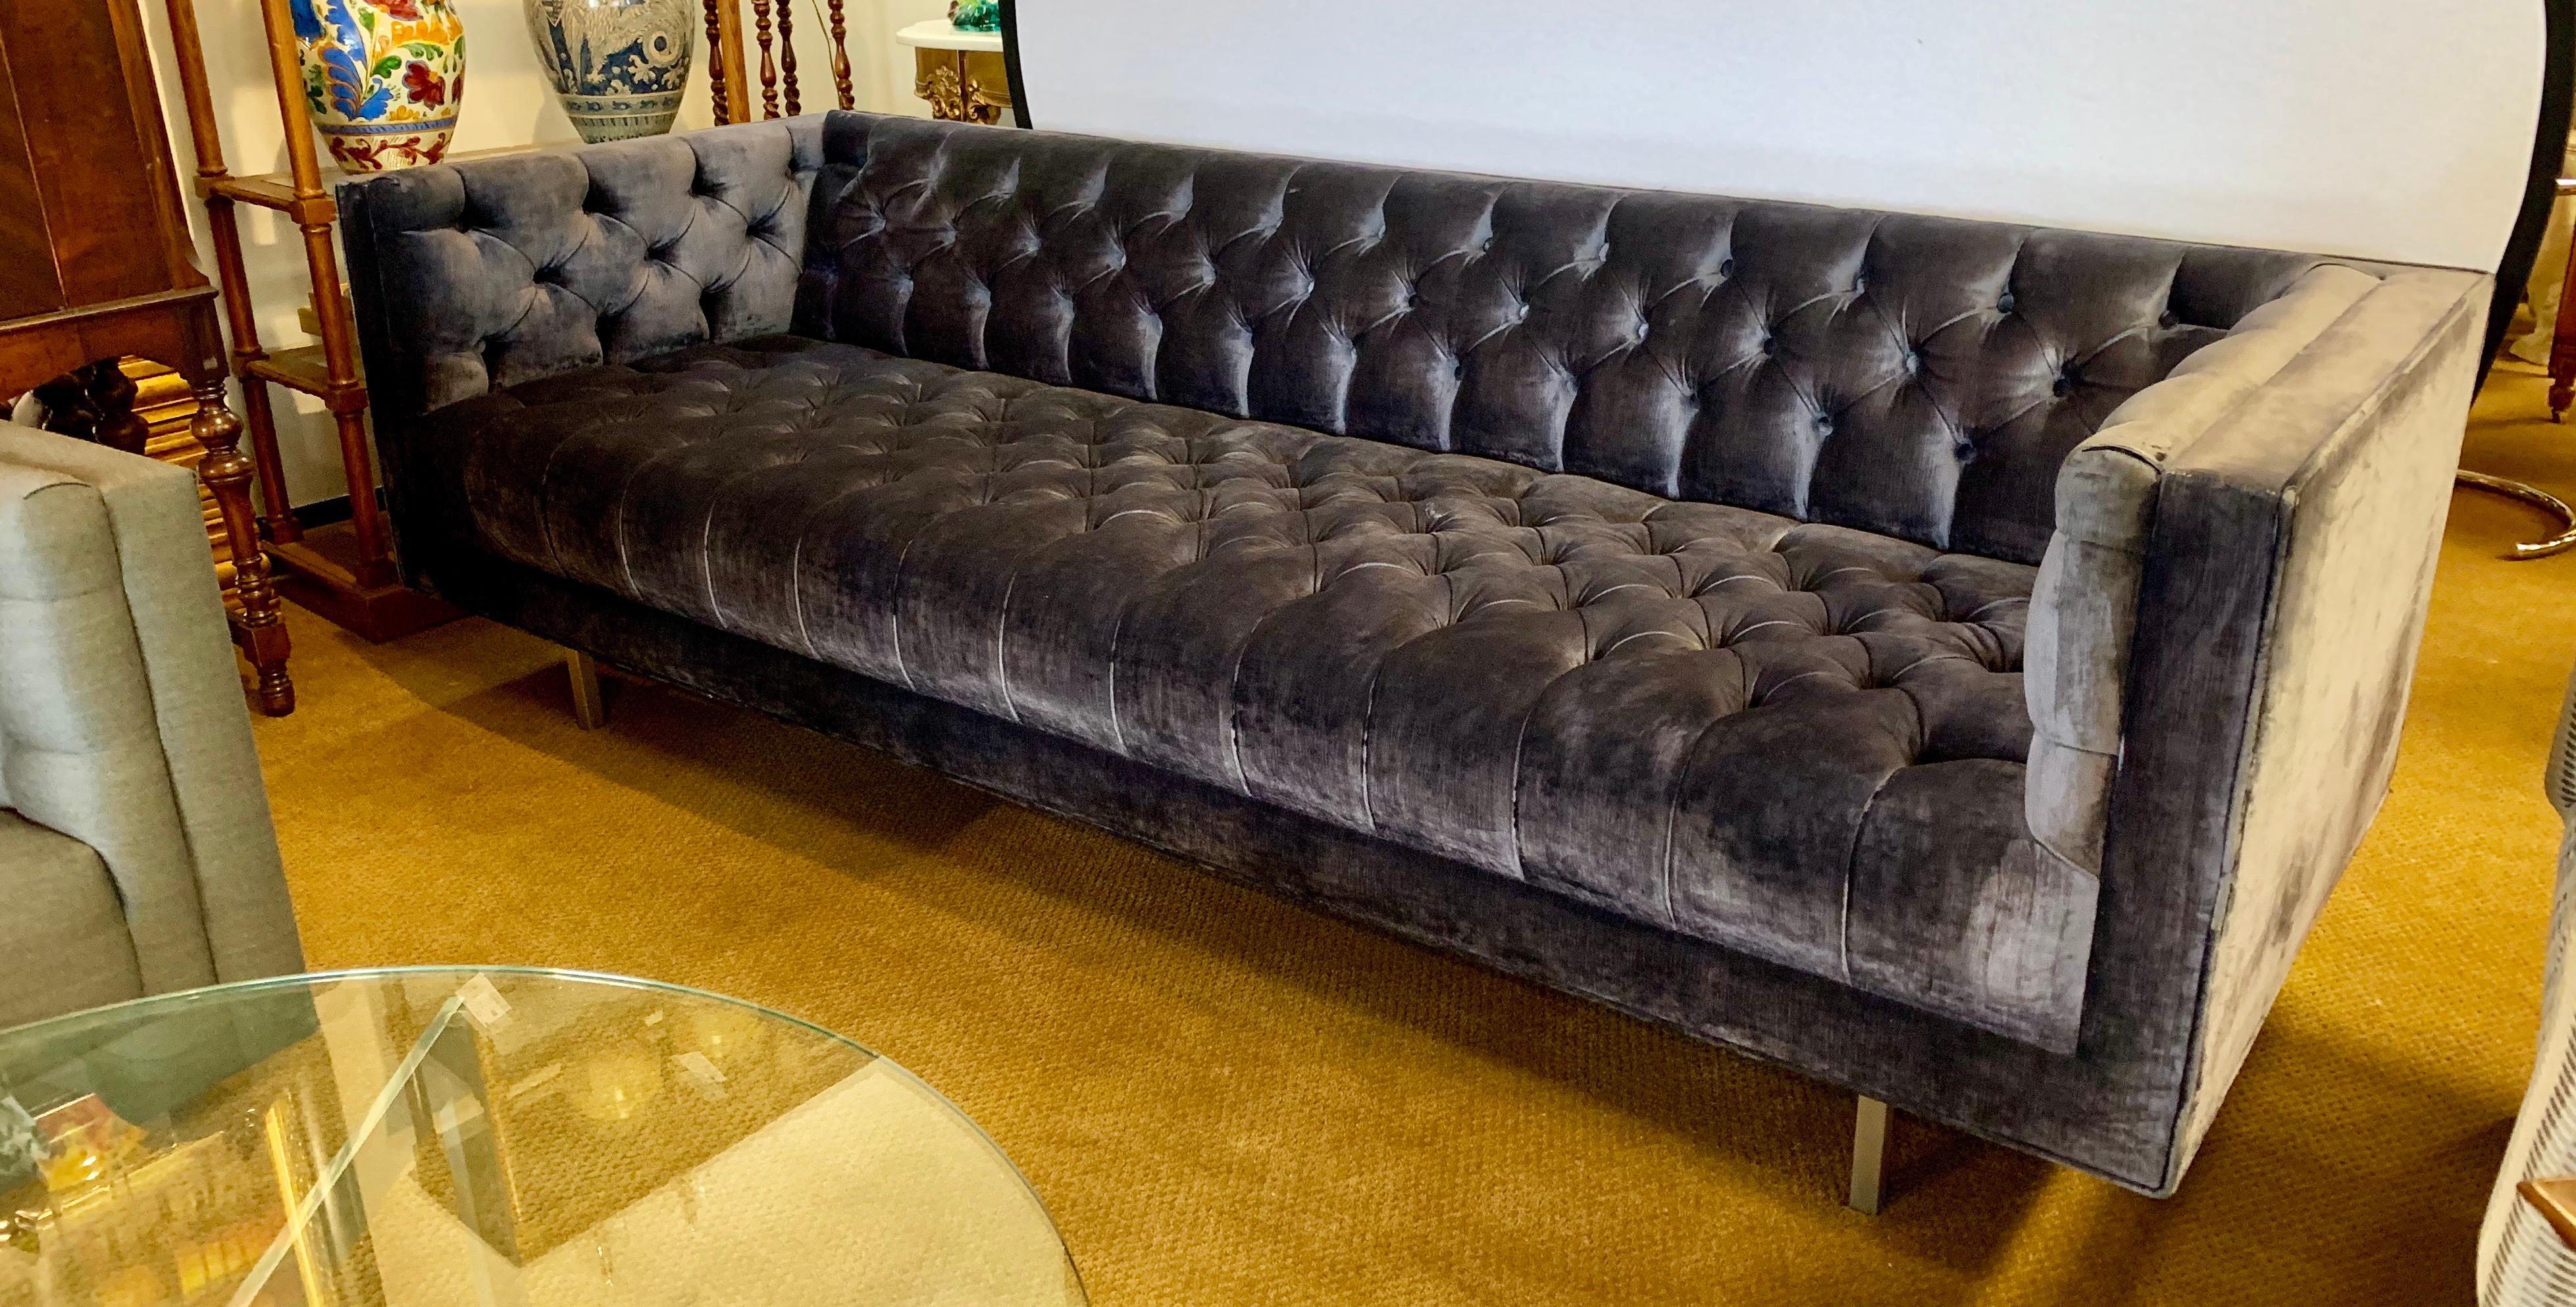 Stunning Milo Baughman style chesterfield with a low pile velvet fabric that looks like a charcoal blue color with hints plum, a real eye catcher. This custom piece is nothing short of spectacular. Sleek and modern and oh so comfortable!